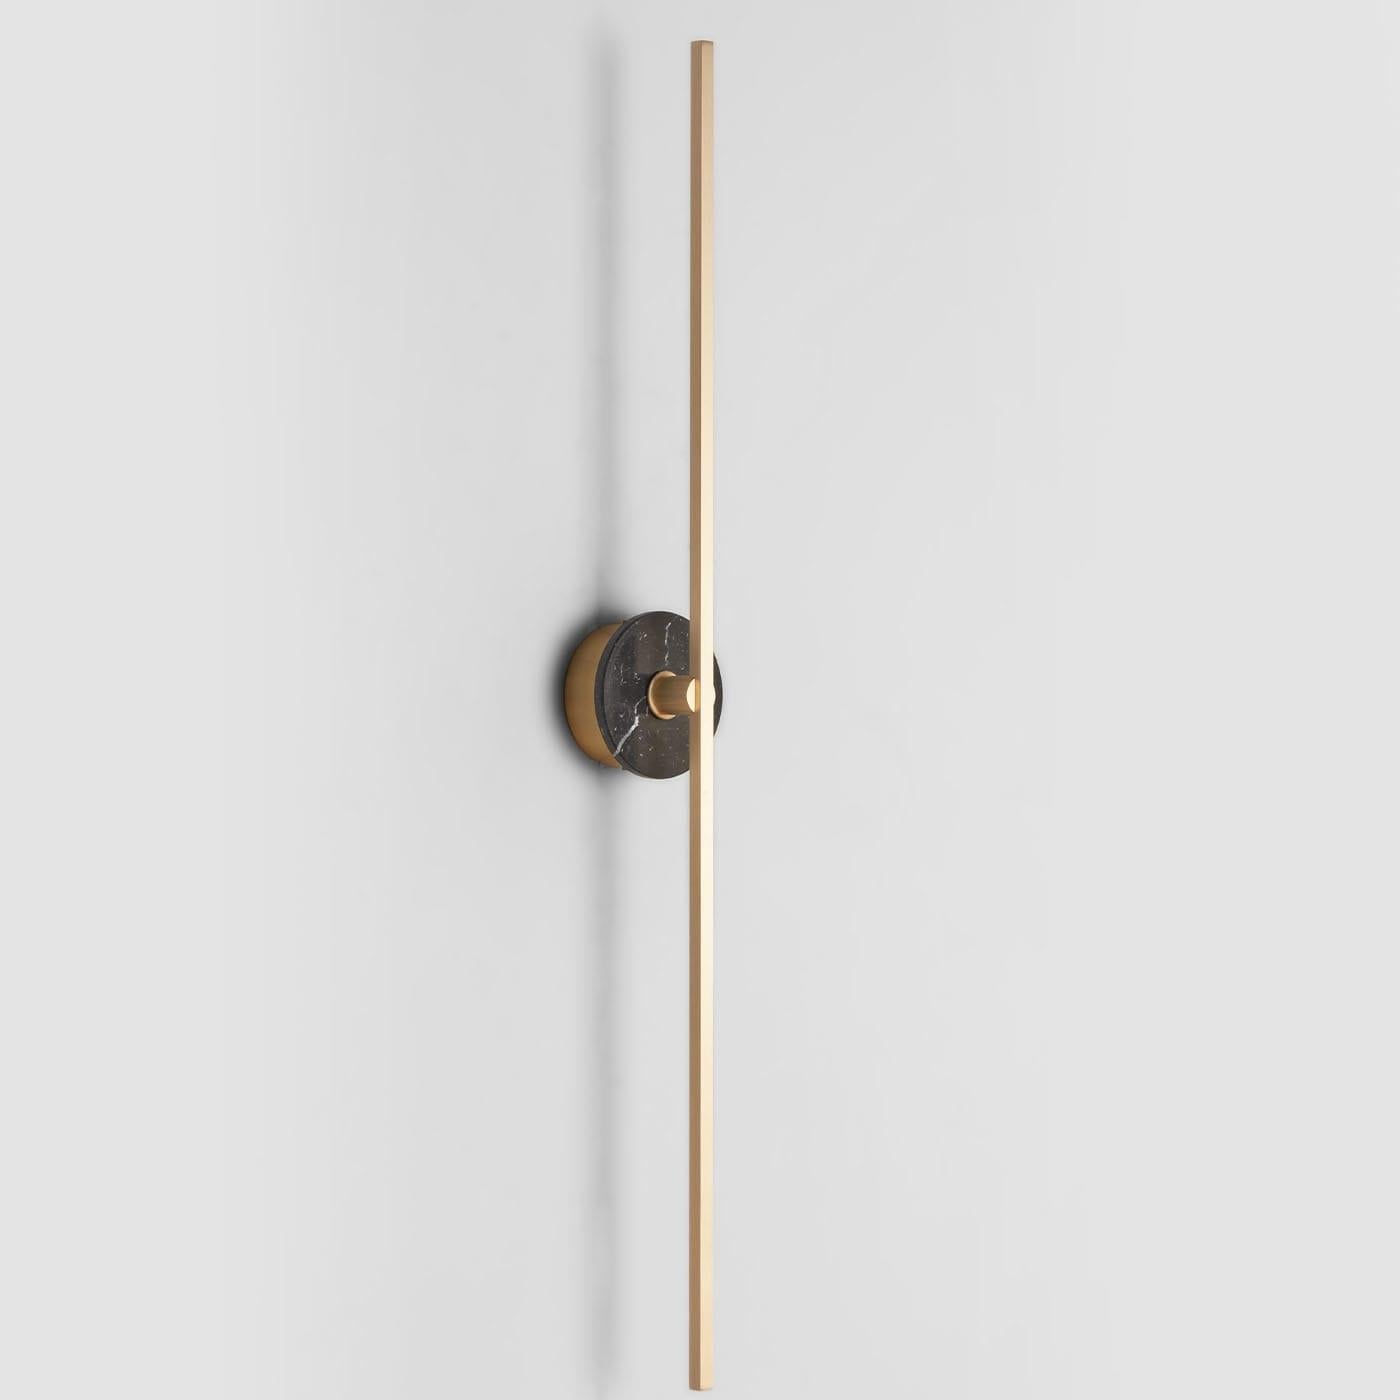 The Grand stick wall sconce is a contemporary lighting fixture that features a Minimalist design with thin brass profiles and advanced LED technology. It emits a warm and diffused light that adds a cozy and inviting atmosphere to any room. The black